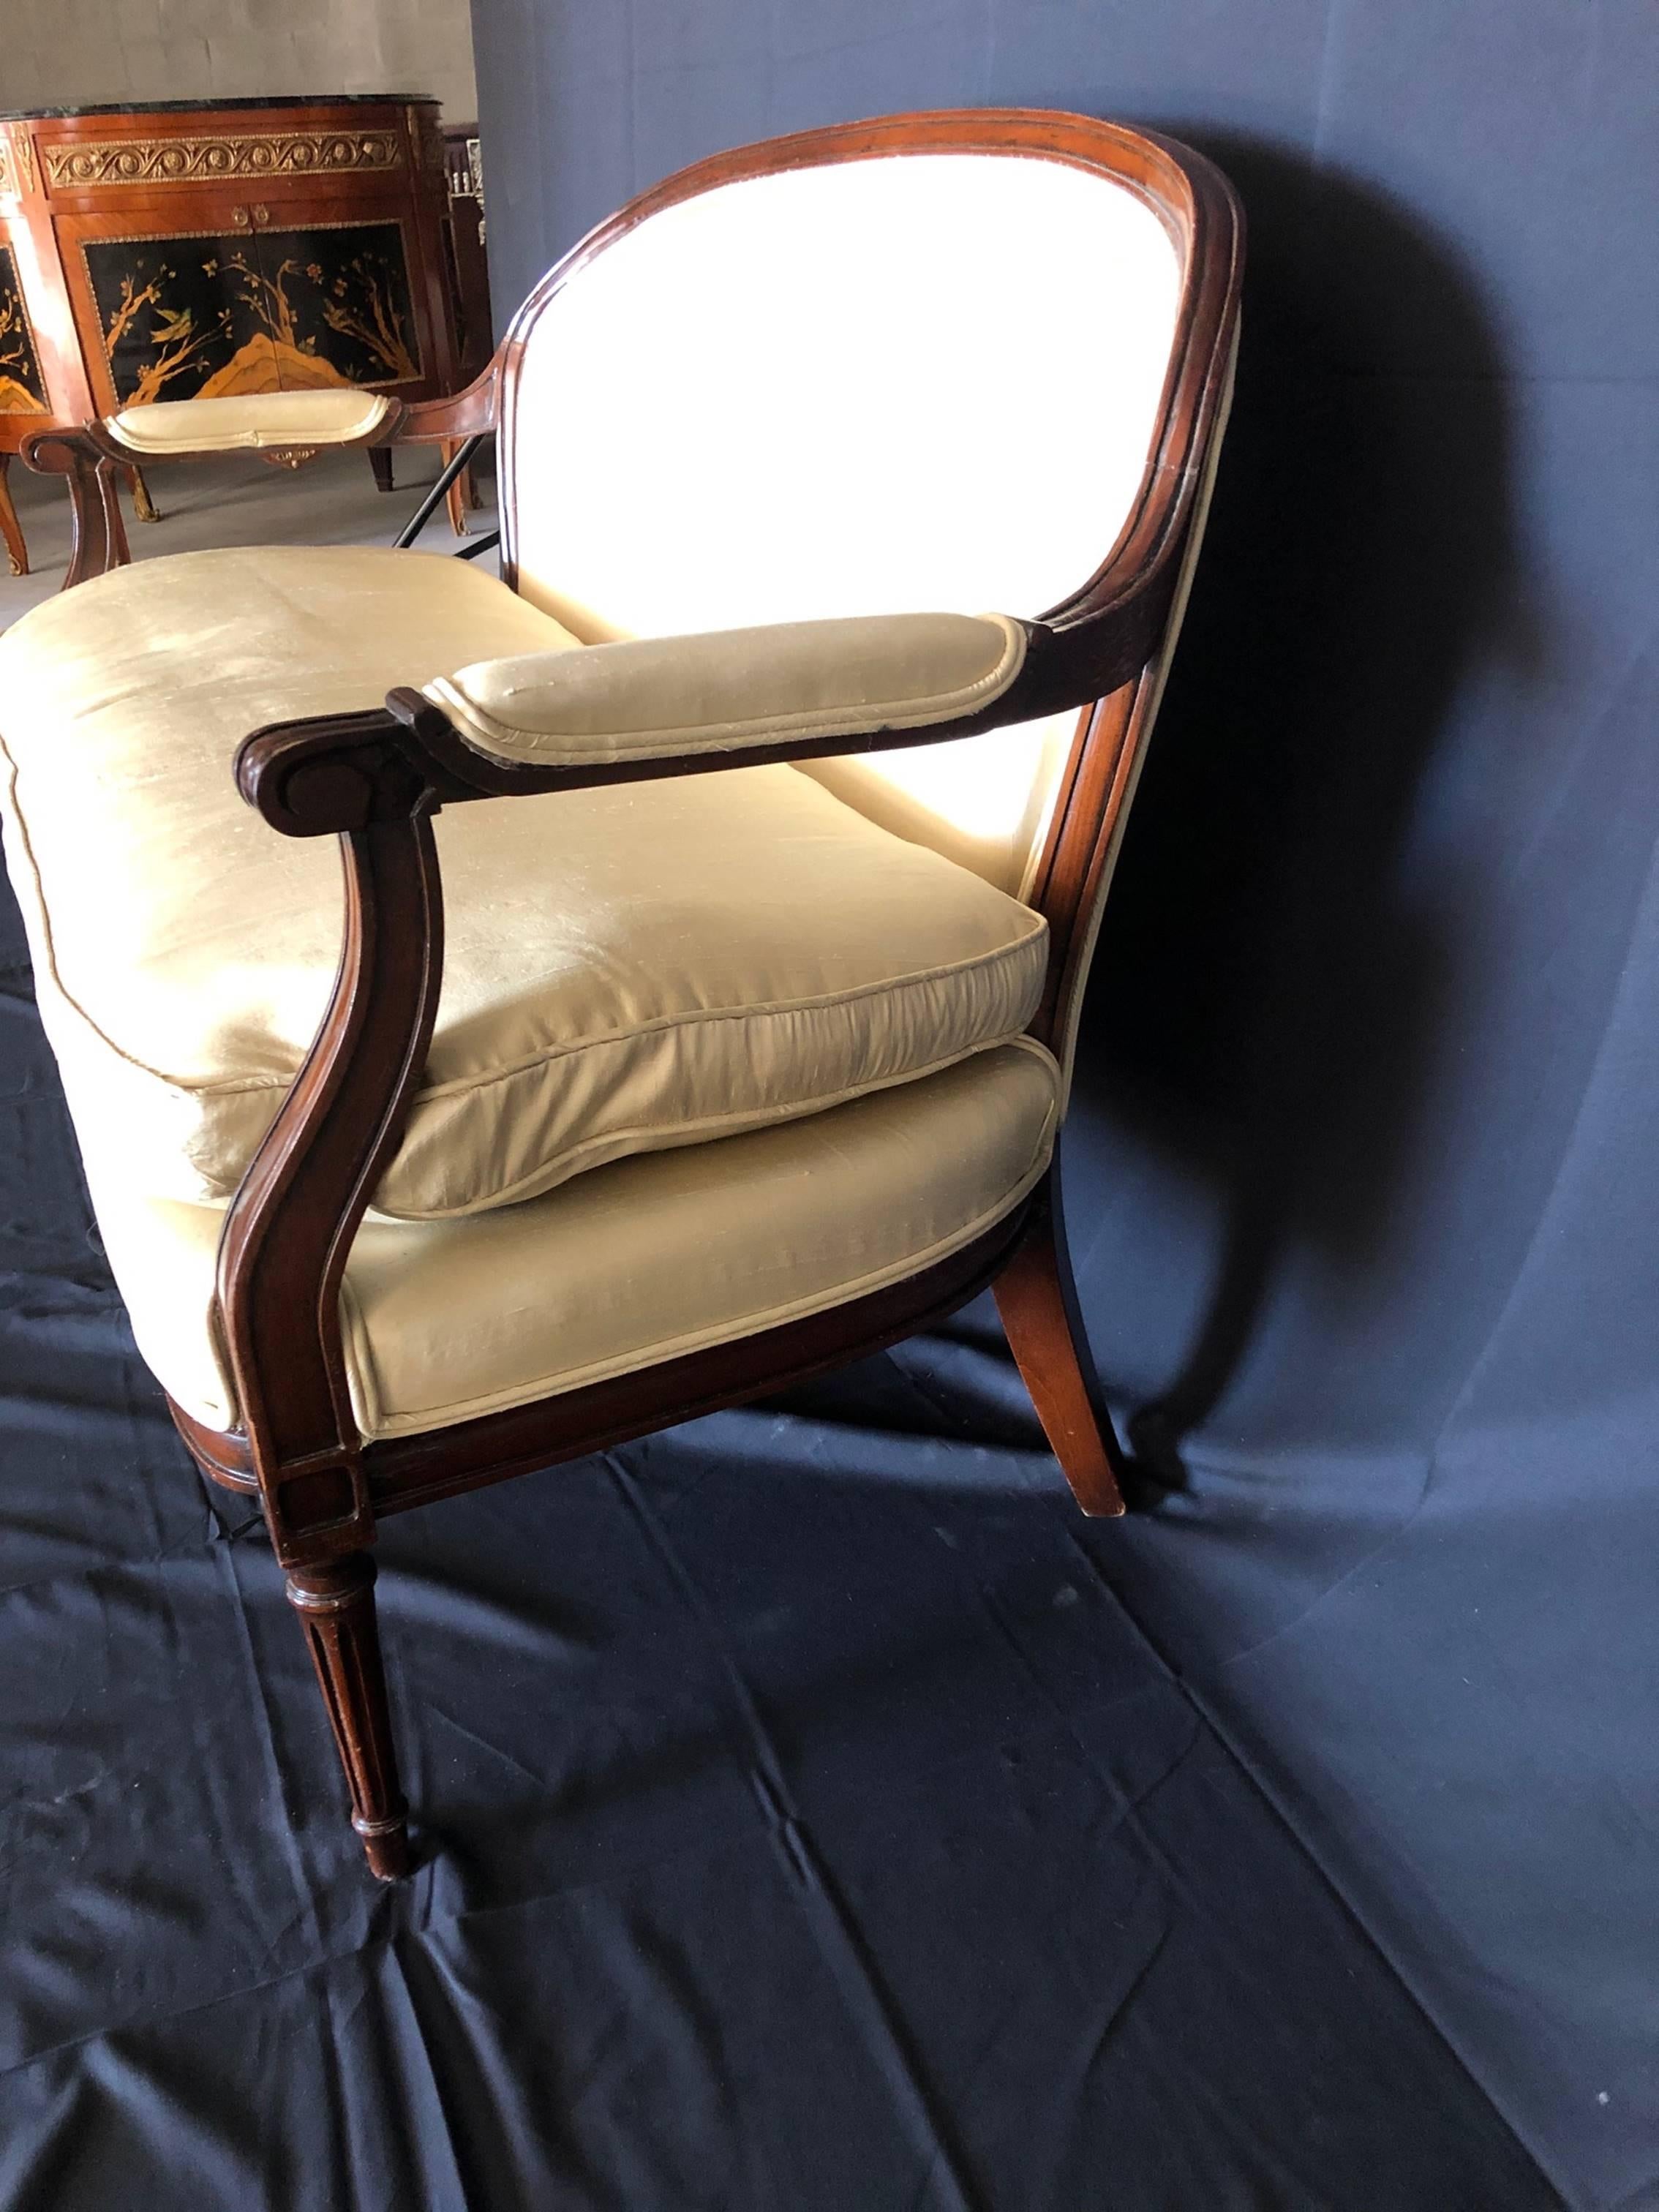 Beautiful Louis XVI style mahogany loveseat or settee with sumptuous high quality ivory silk and down seat cushion and upholstered arm rests. Silk has a few minor marks; see photos. Nicely carved details and tapered elegant legs. #2295.